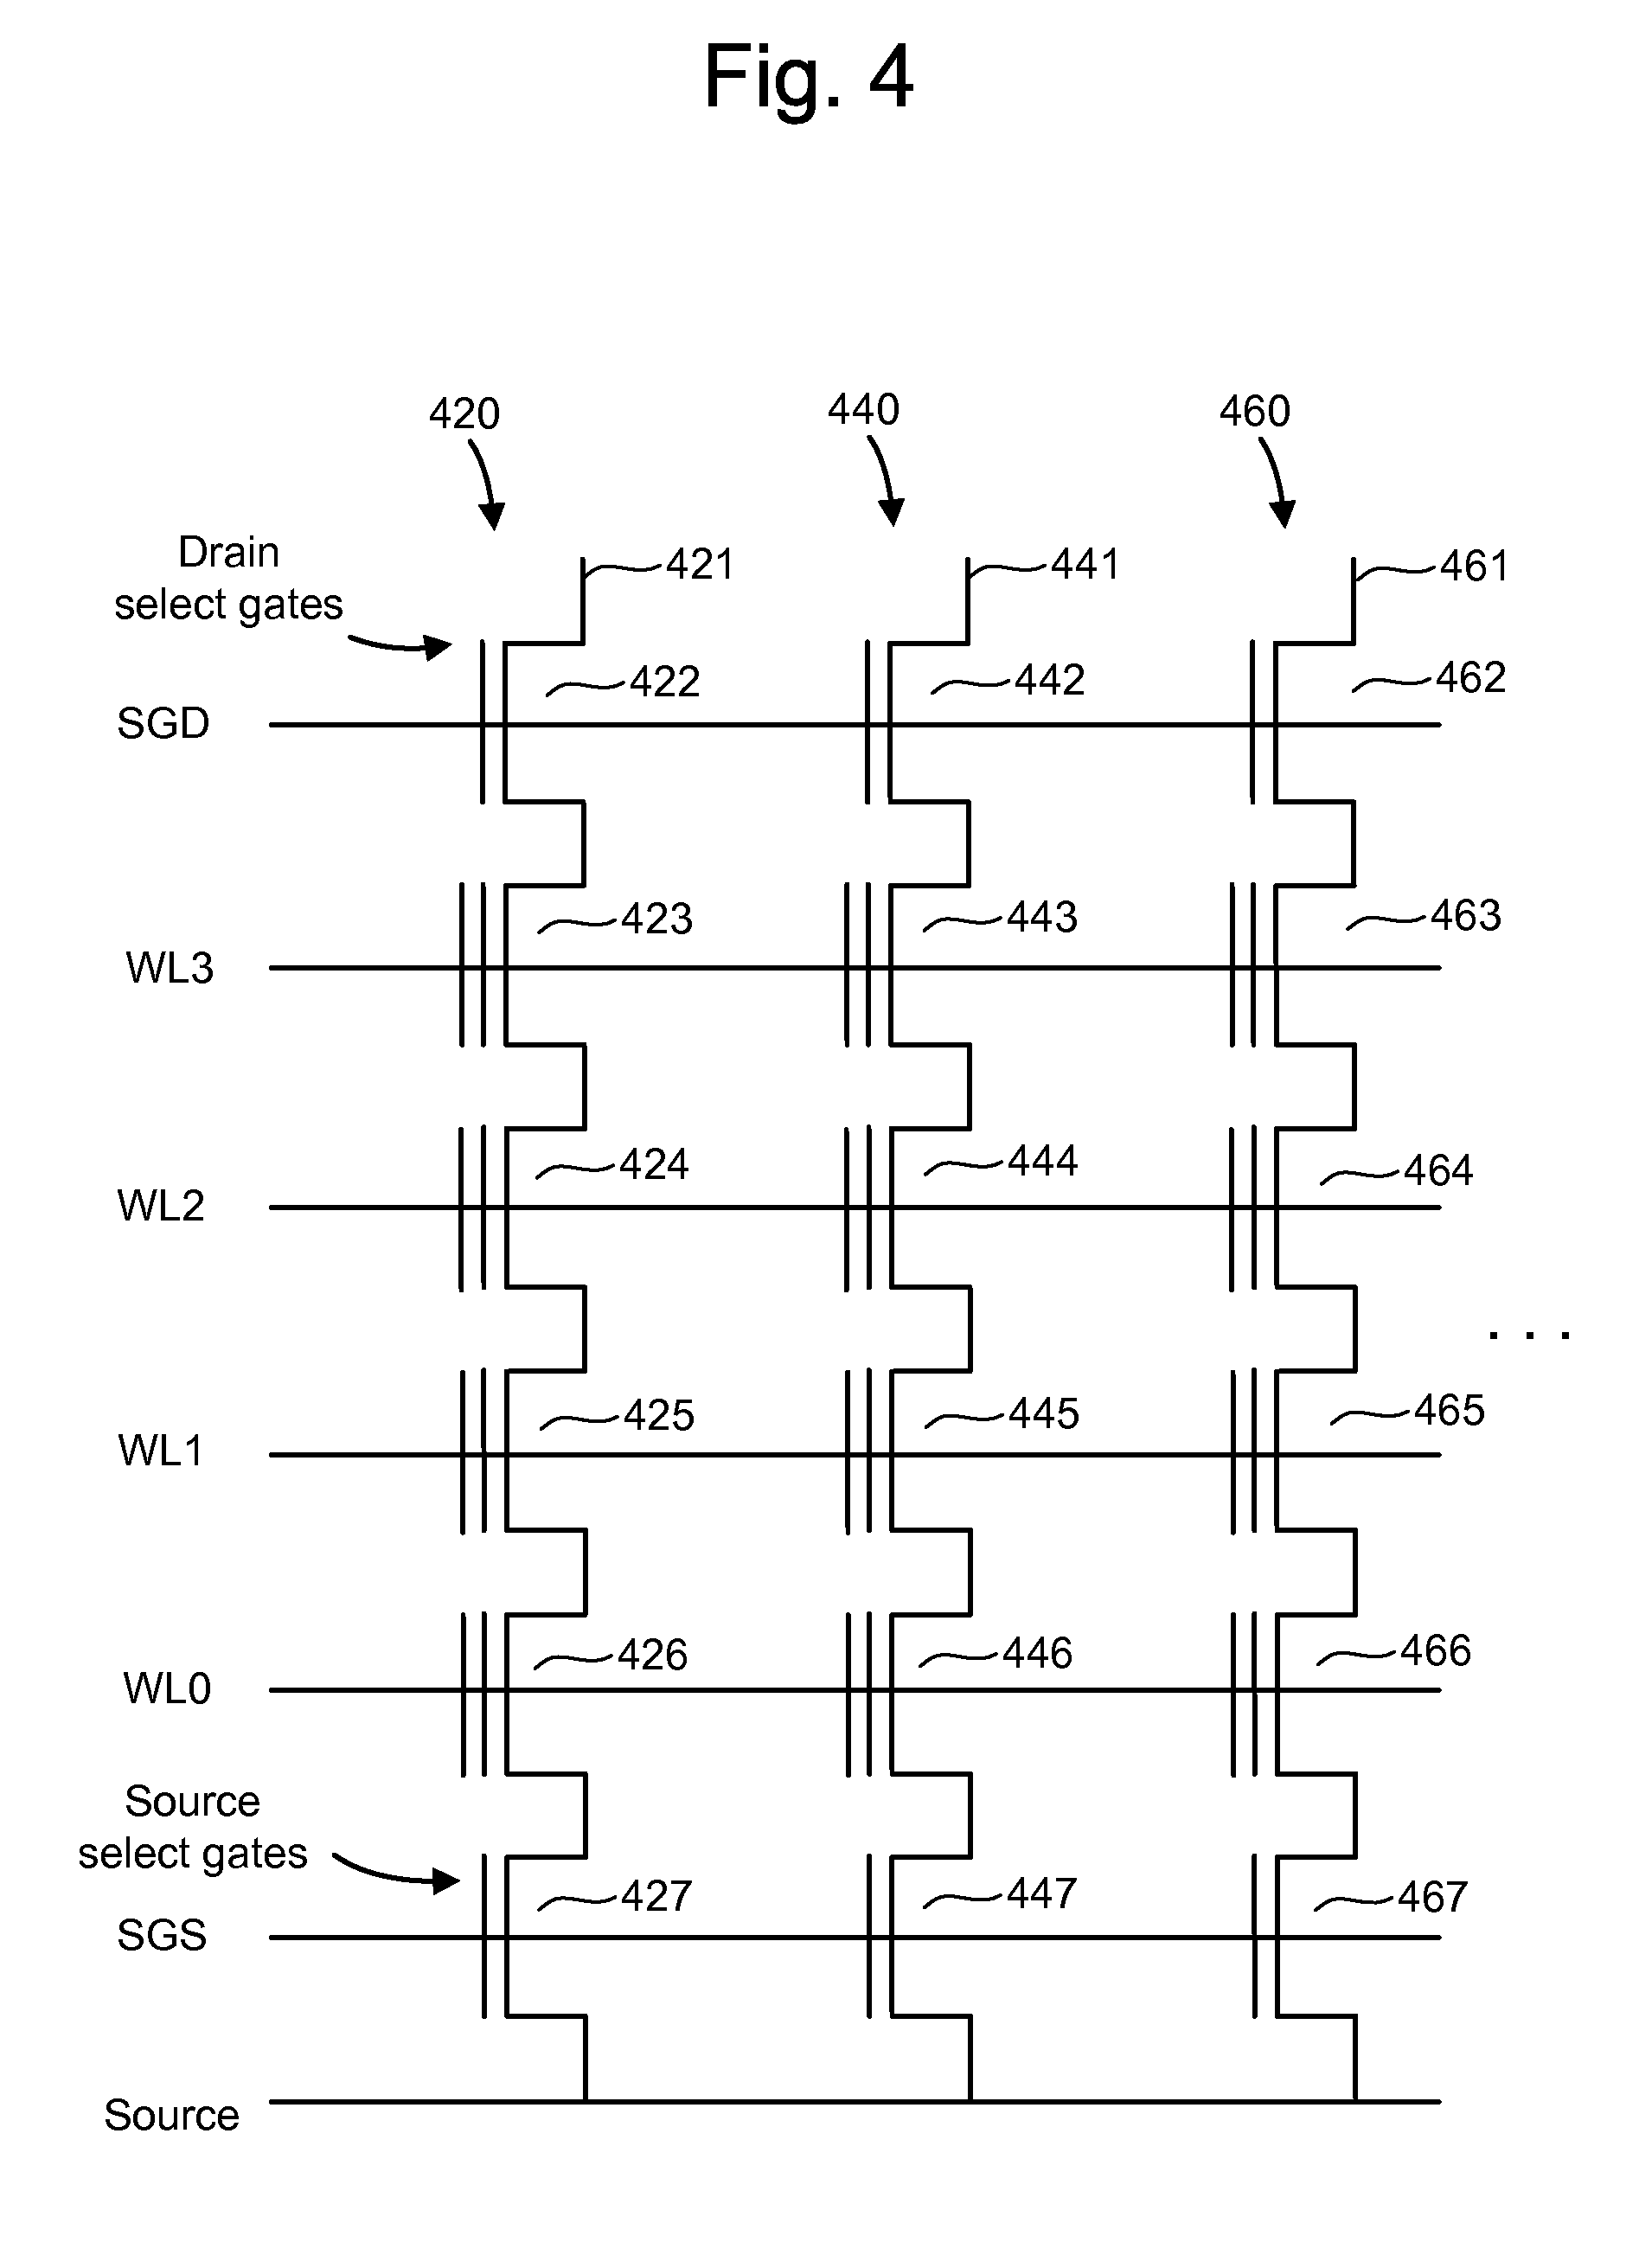 System for increasing programming speed for non-volatile memory by applying counter-transitioning waveforms to word lines